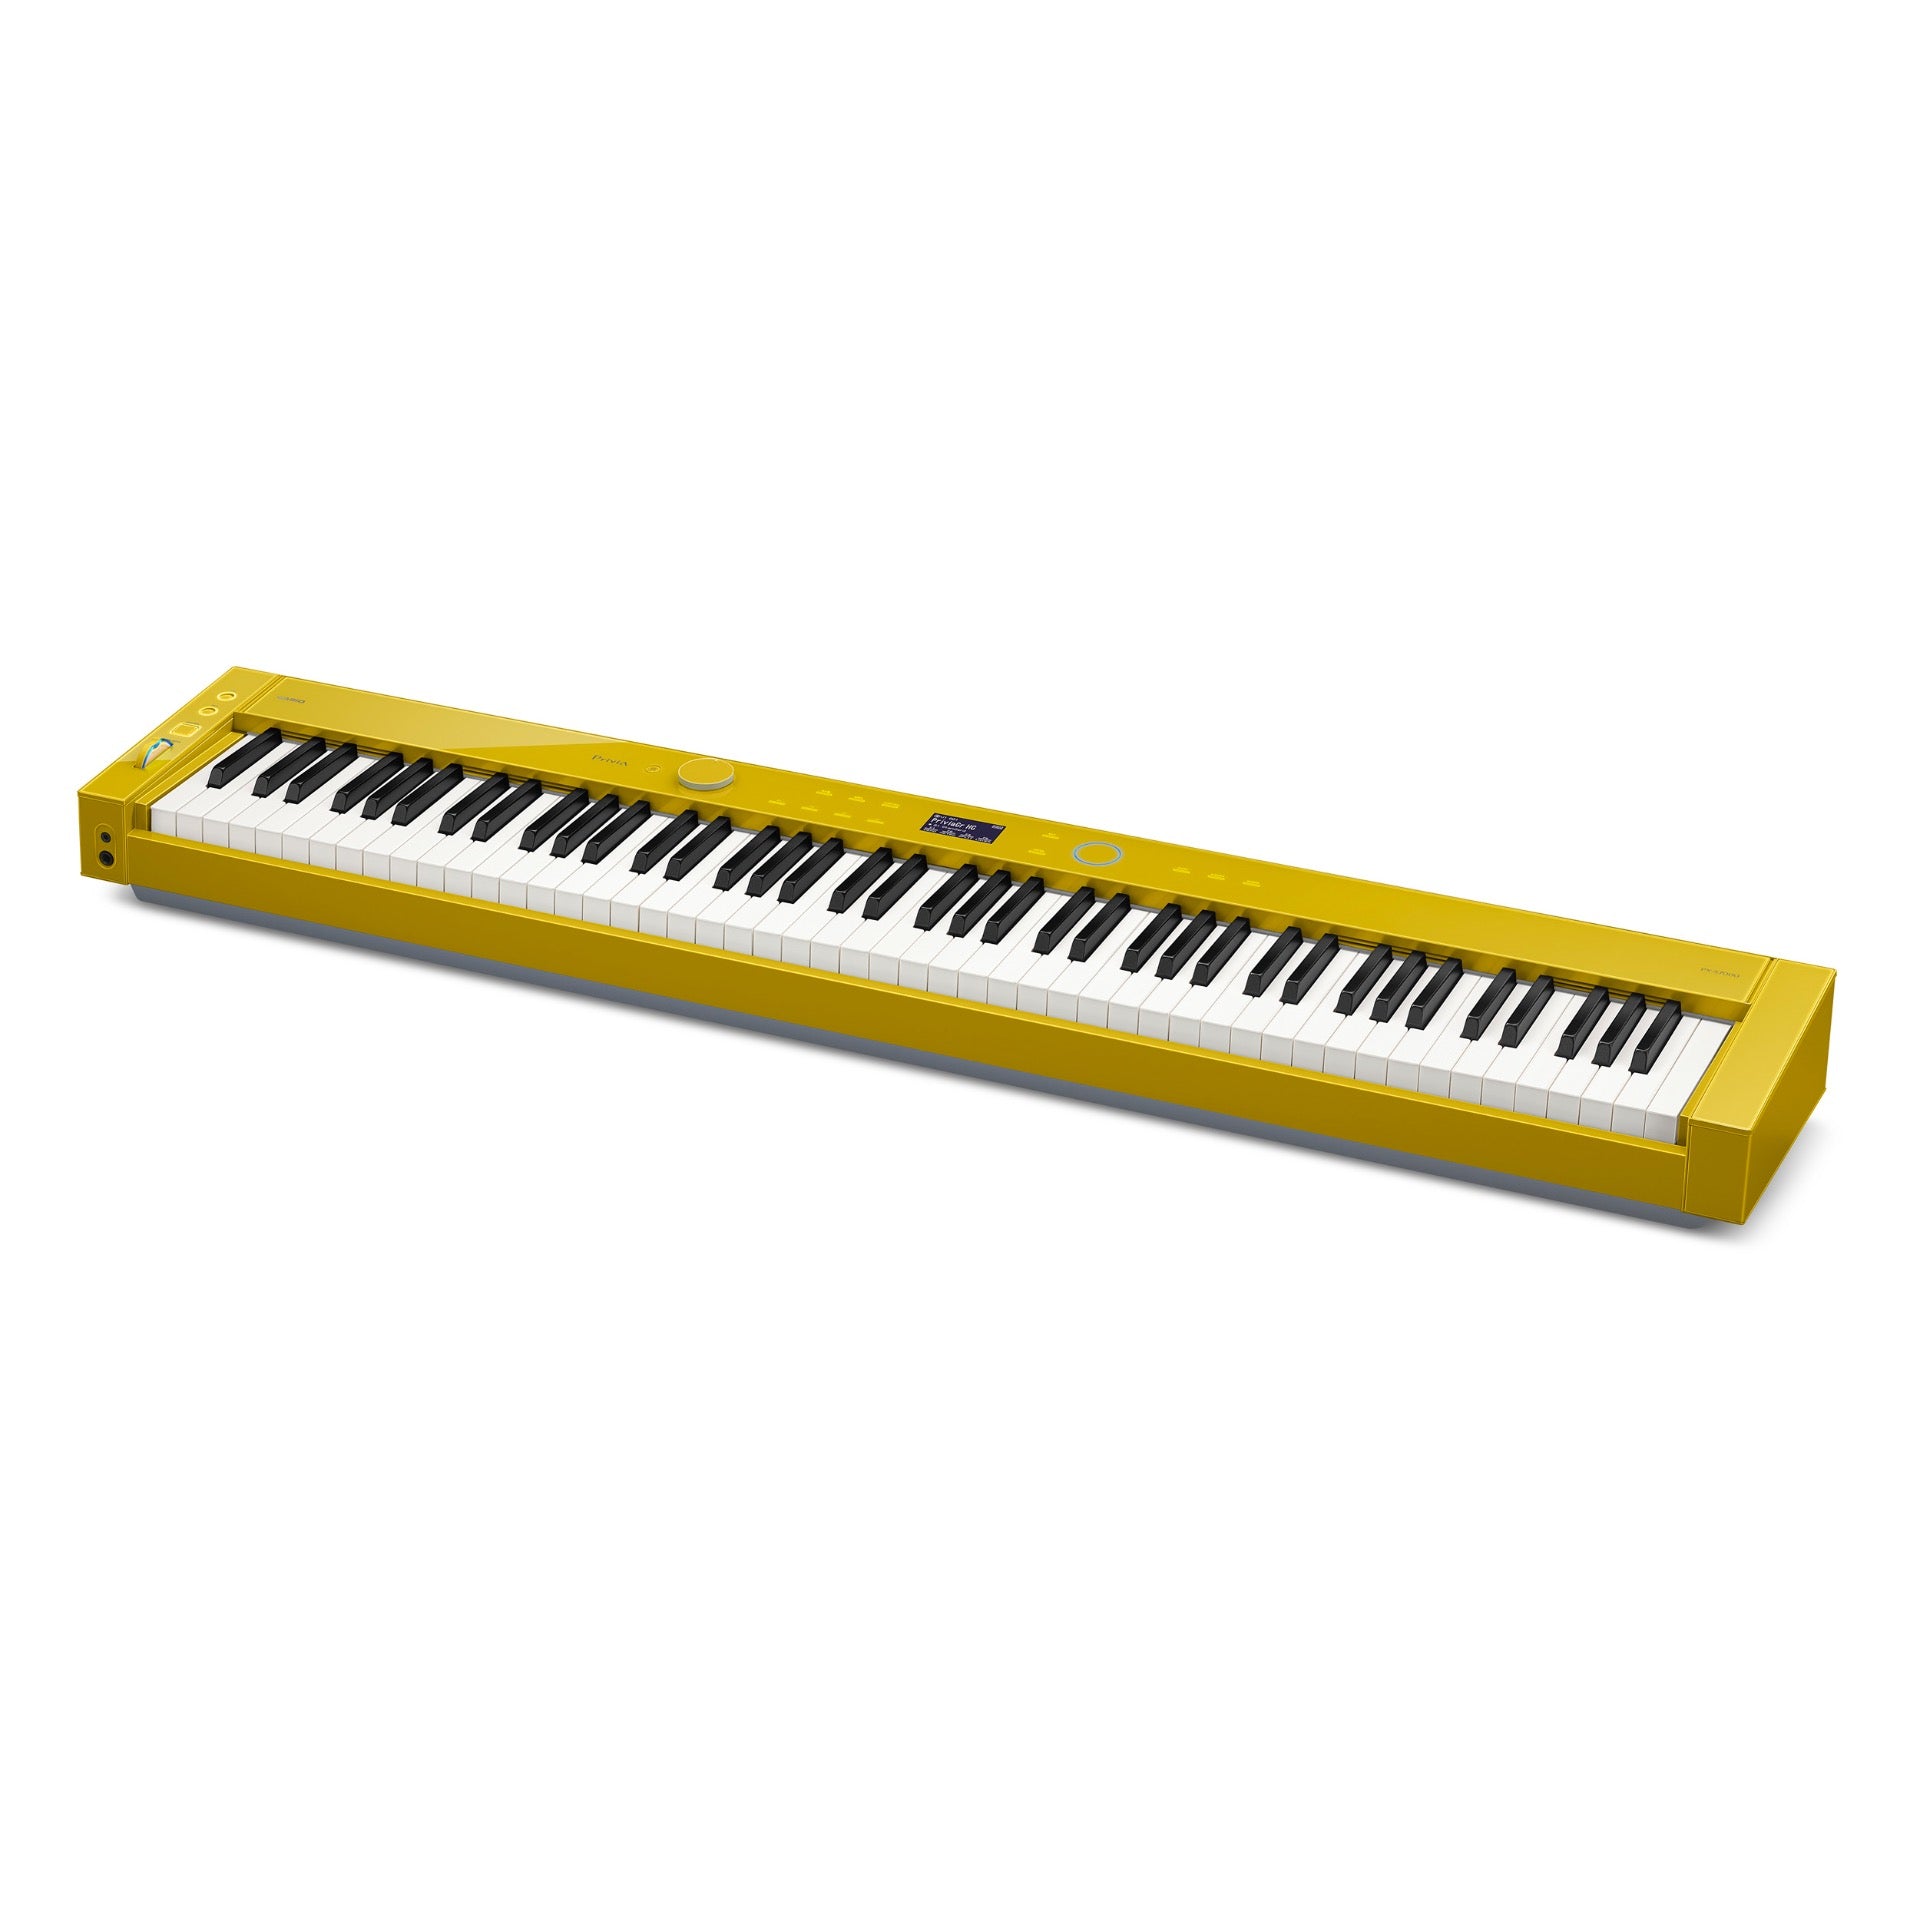 Casio Privia PX-S7000HM Scaled Hammer Action Keyboard - Harmonious